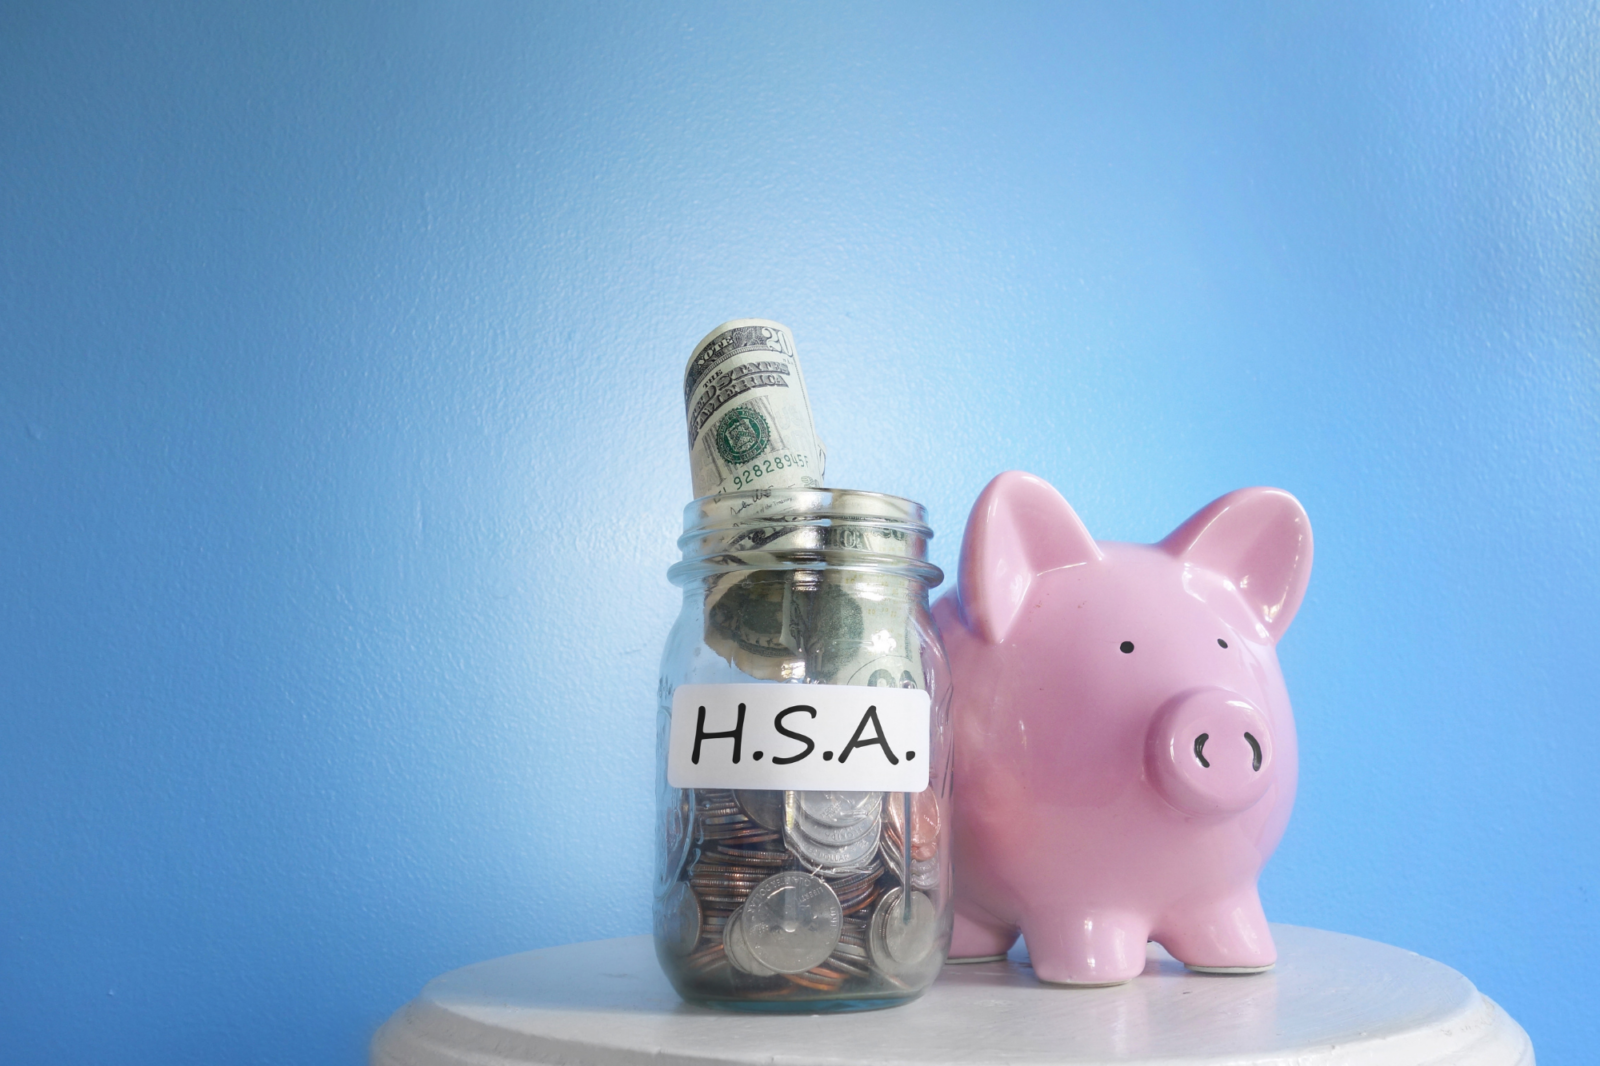 Can Health Savings Accounts Be Used for LASIK Surgery?